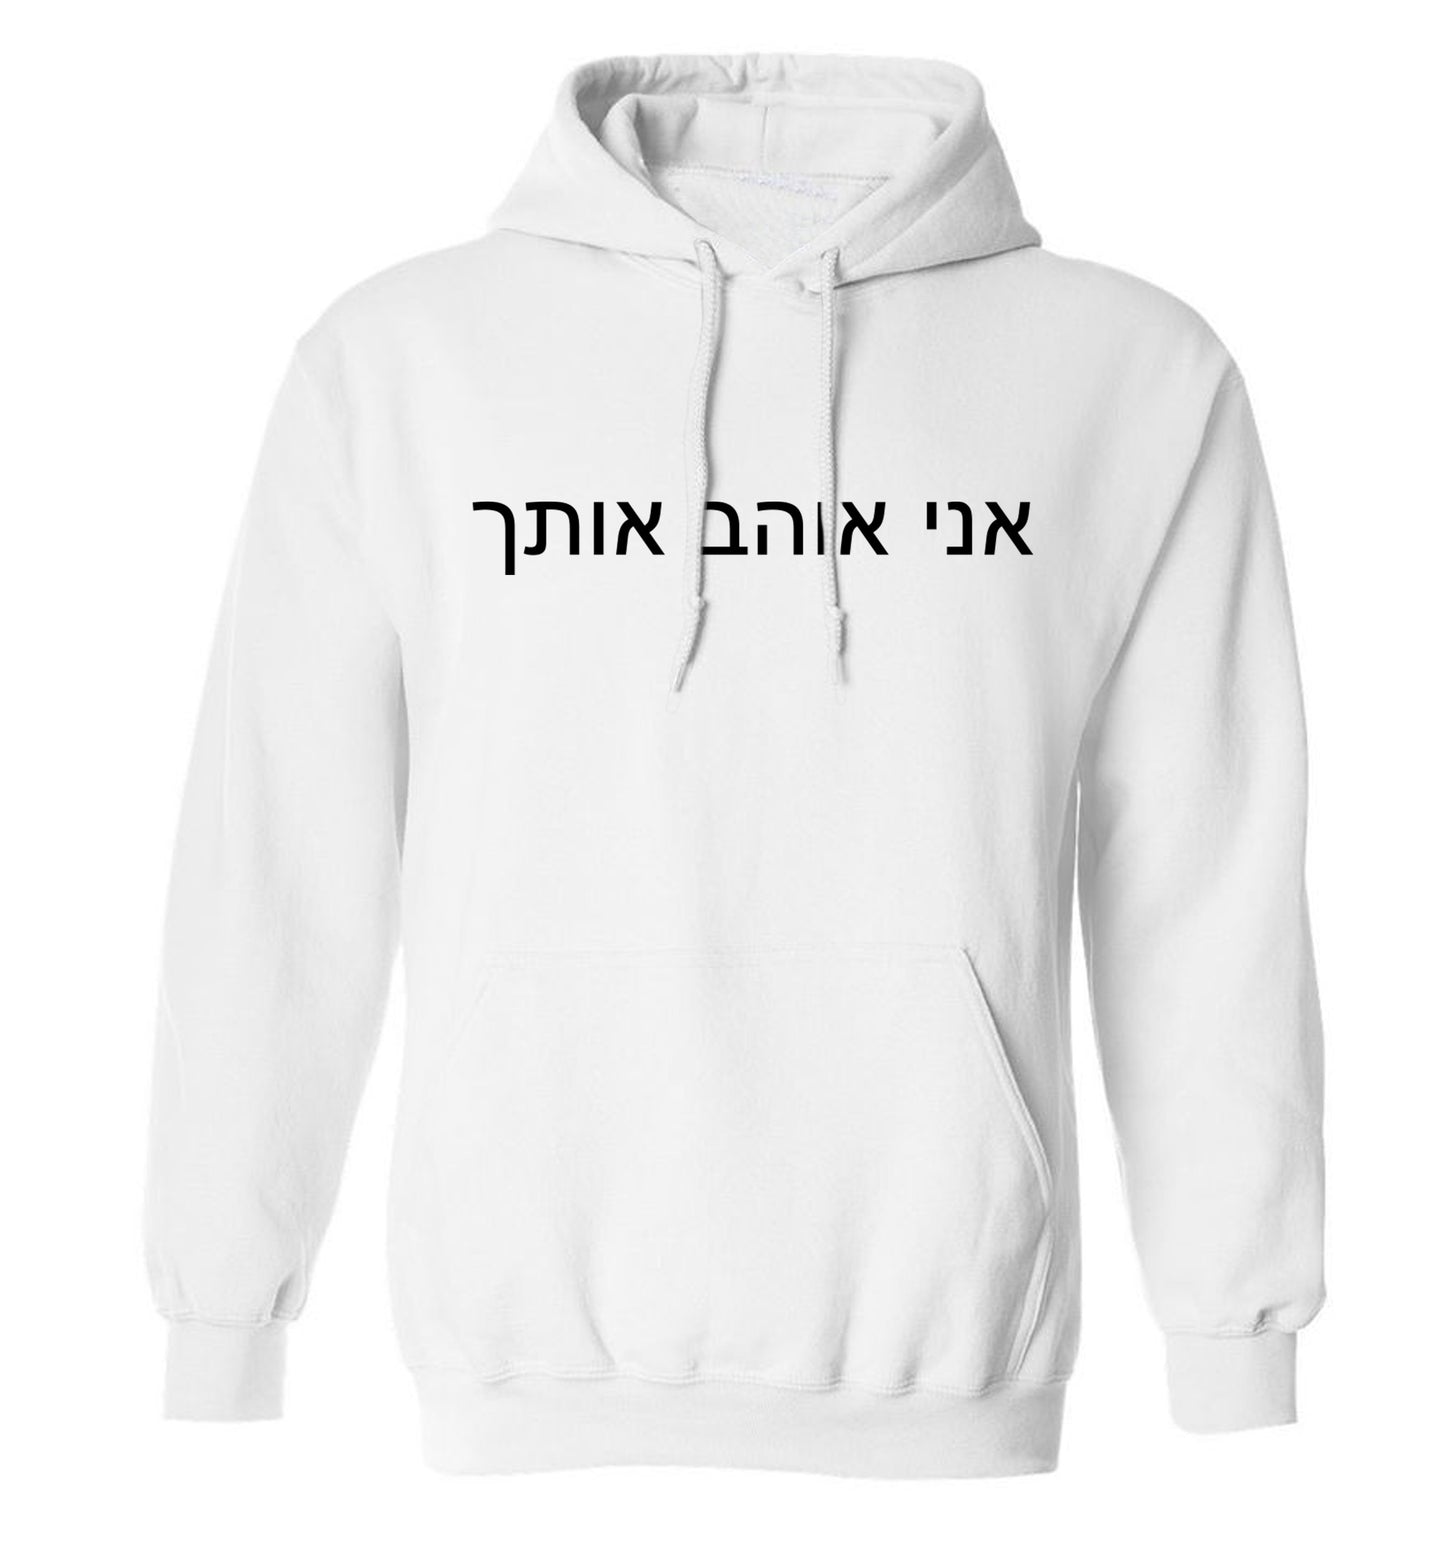 ___ ____ ____ - I love you adults unisex white hoodie 2XL